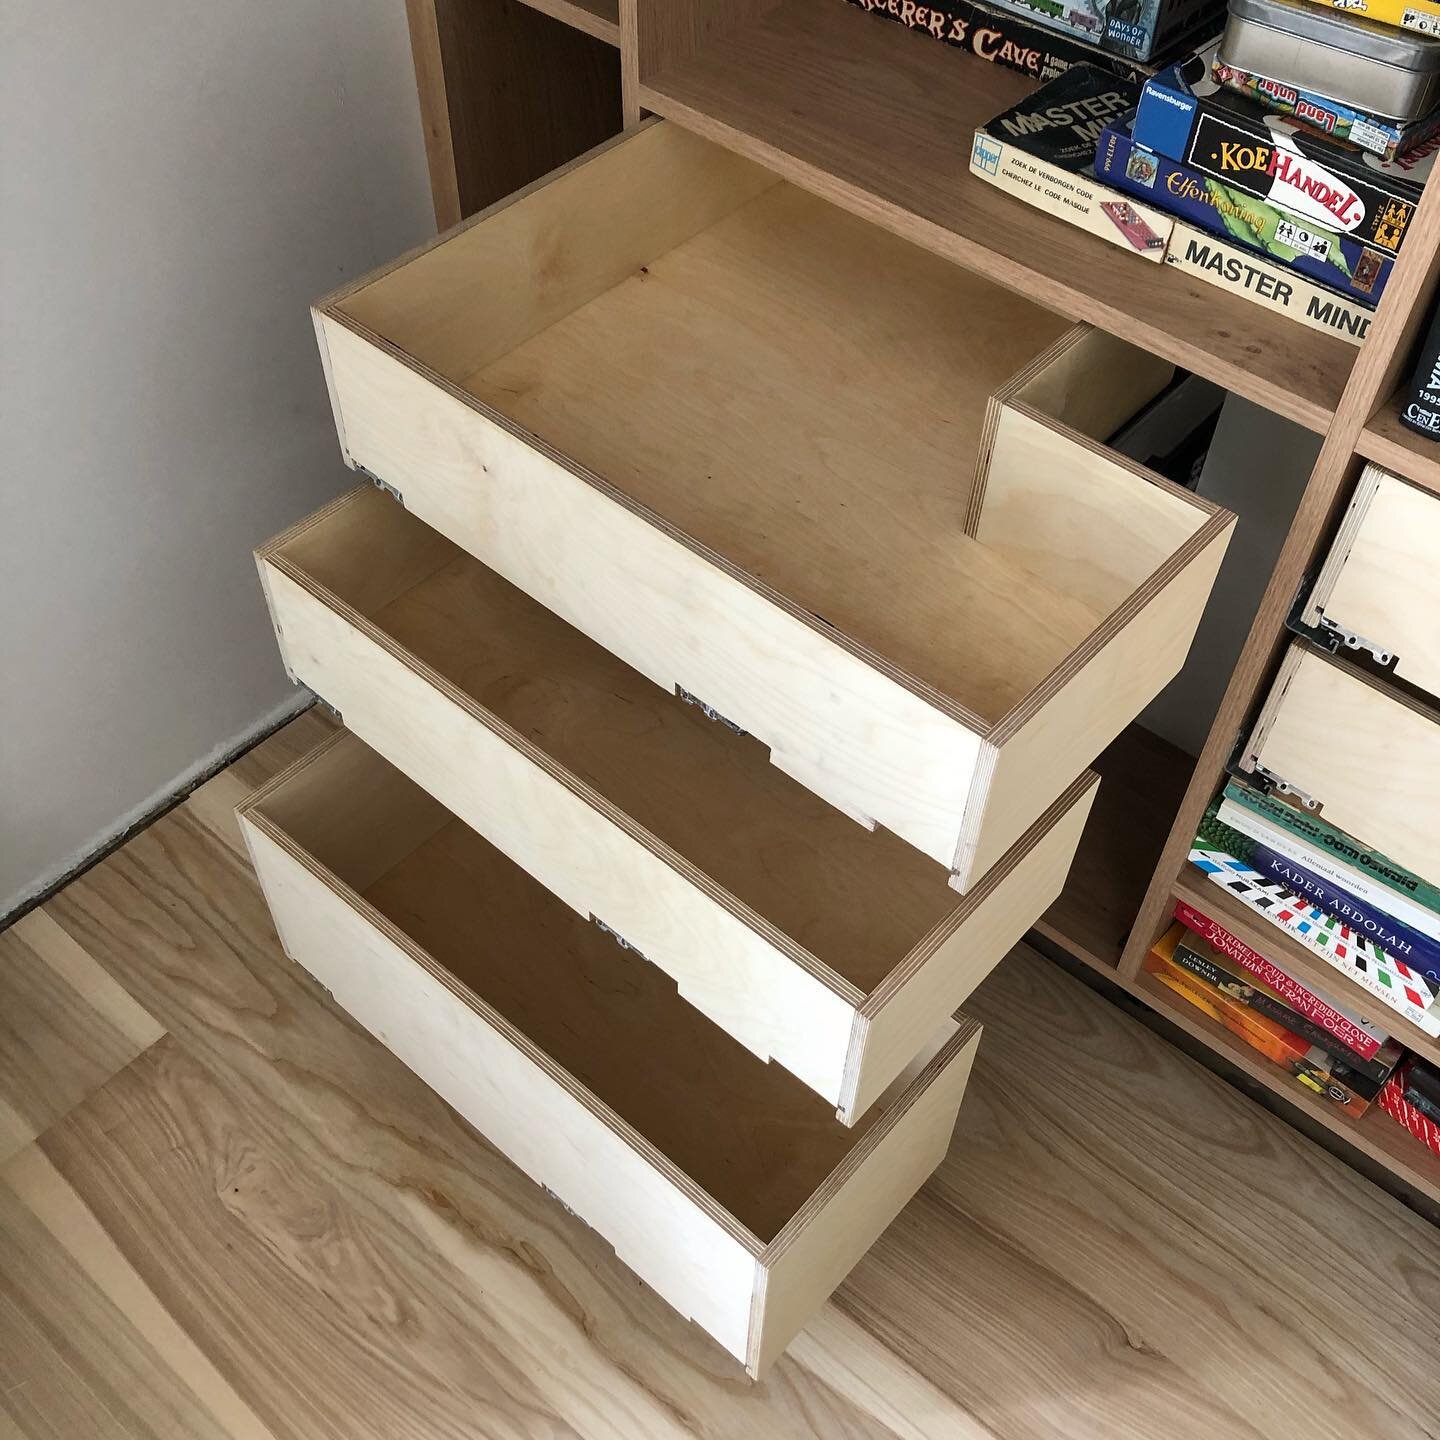 Tricky drawer day! To maximise the usable space in the built-in wardrobe, we designed a set of special drawers to go around the existing chimney. To be able to fully extend them out of the cabinet, the right hand drawer slide had to fit fuller undern